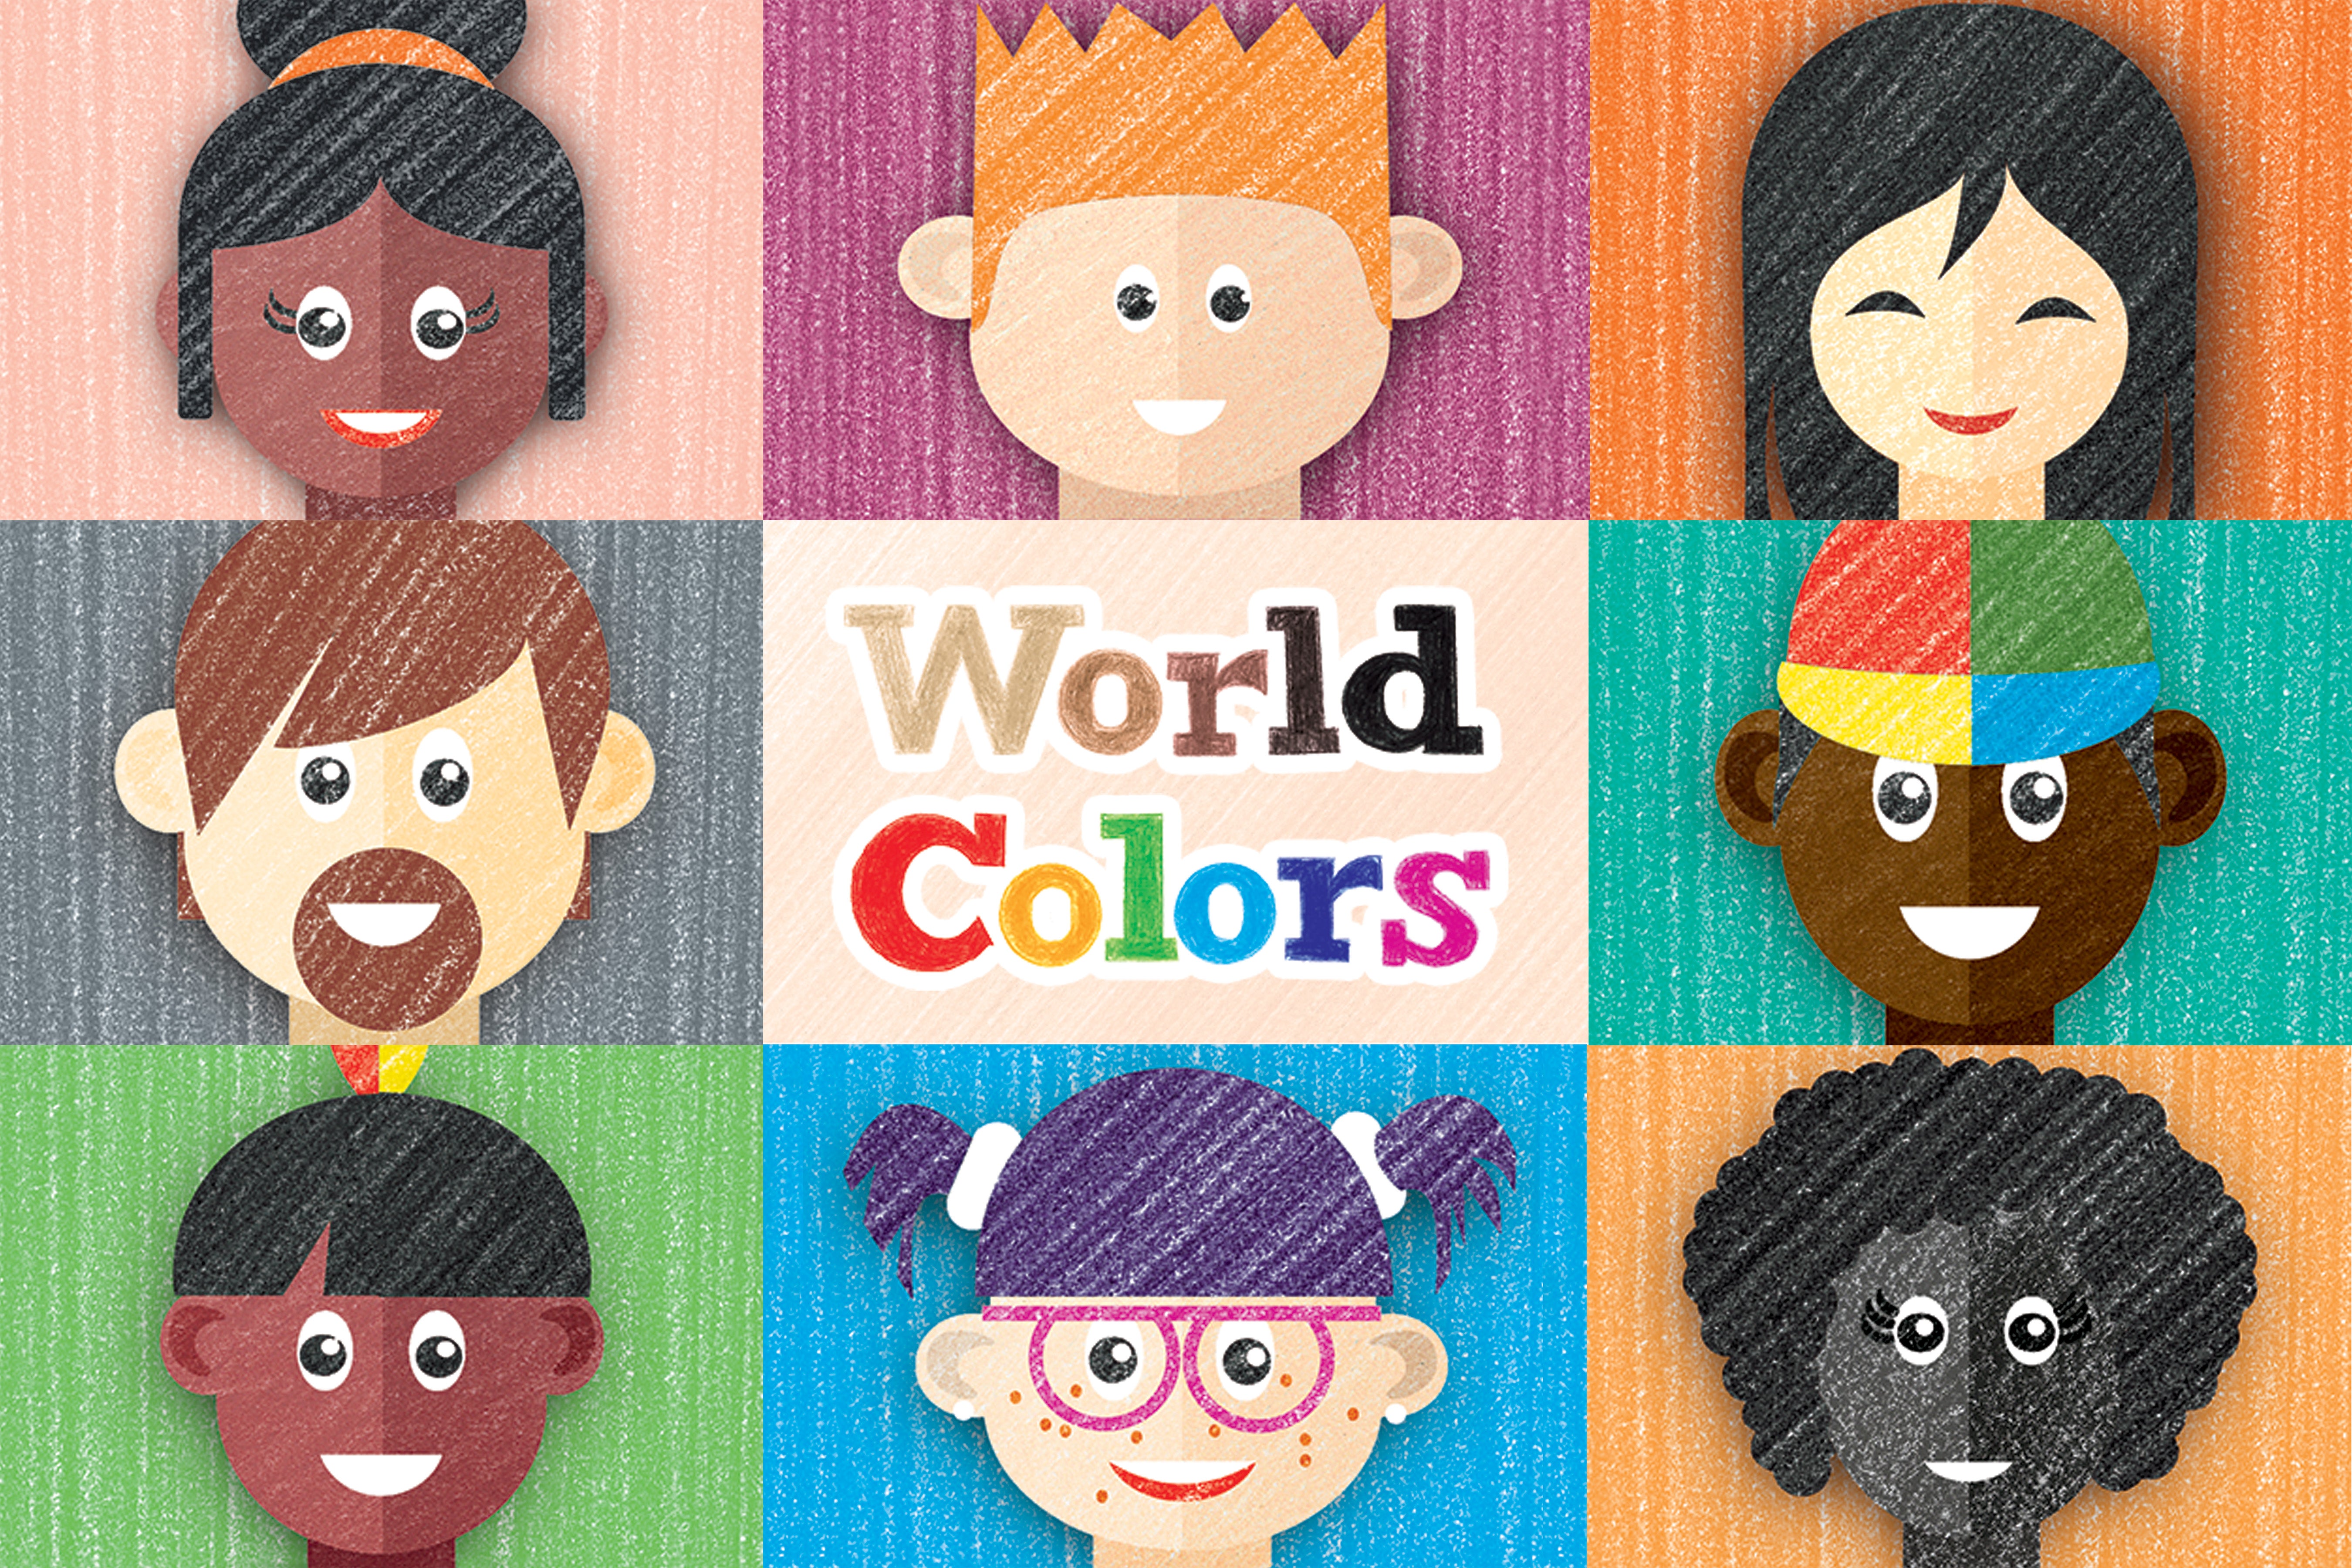 Faber-Castell World Colors Ecopencils, 27 Count - Diverse Skin Tone Colored  Pencils For Kids